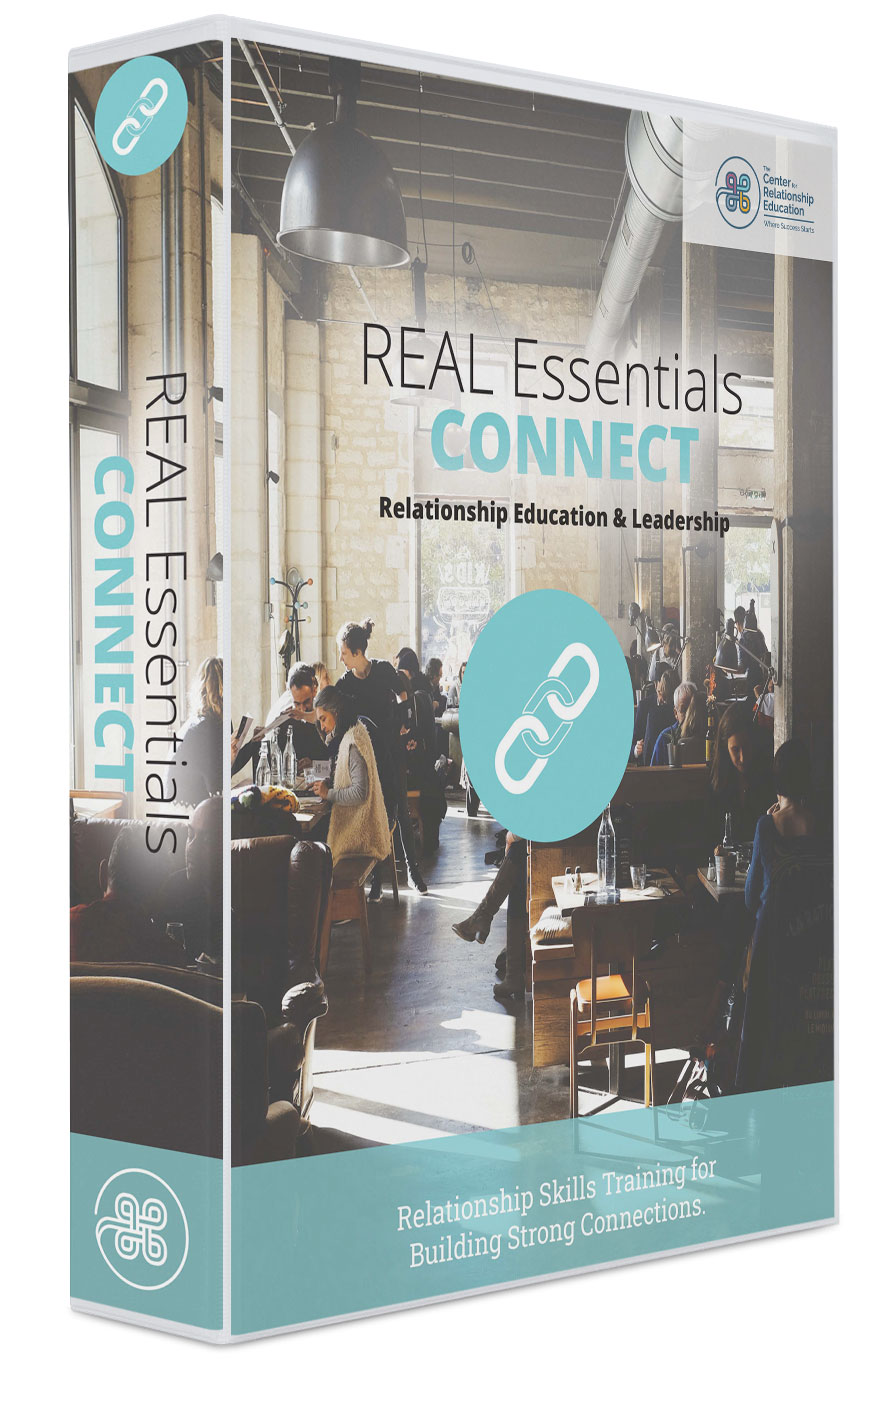 REAL Essentials Connect Certification Training. - Upcoming